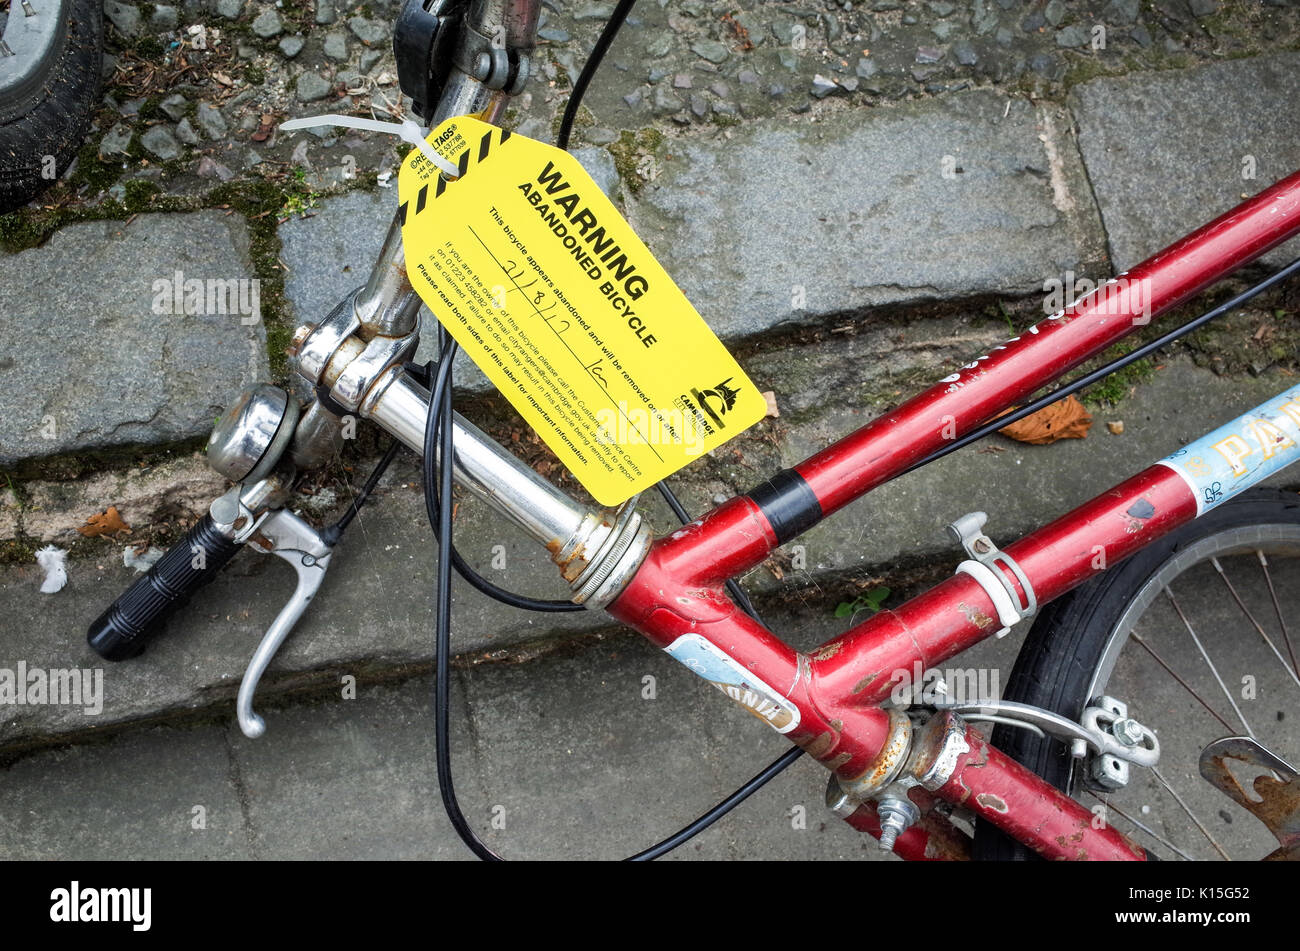 Abandoned Bike - label warning of impending removal of an abandoned bike in Cambridge UK Stock Photo